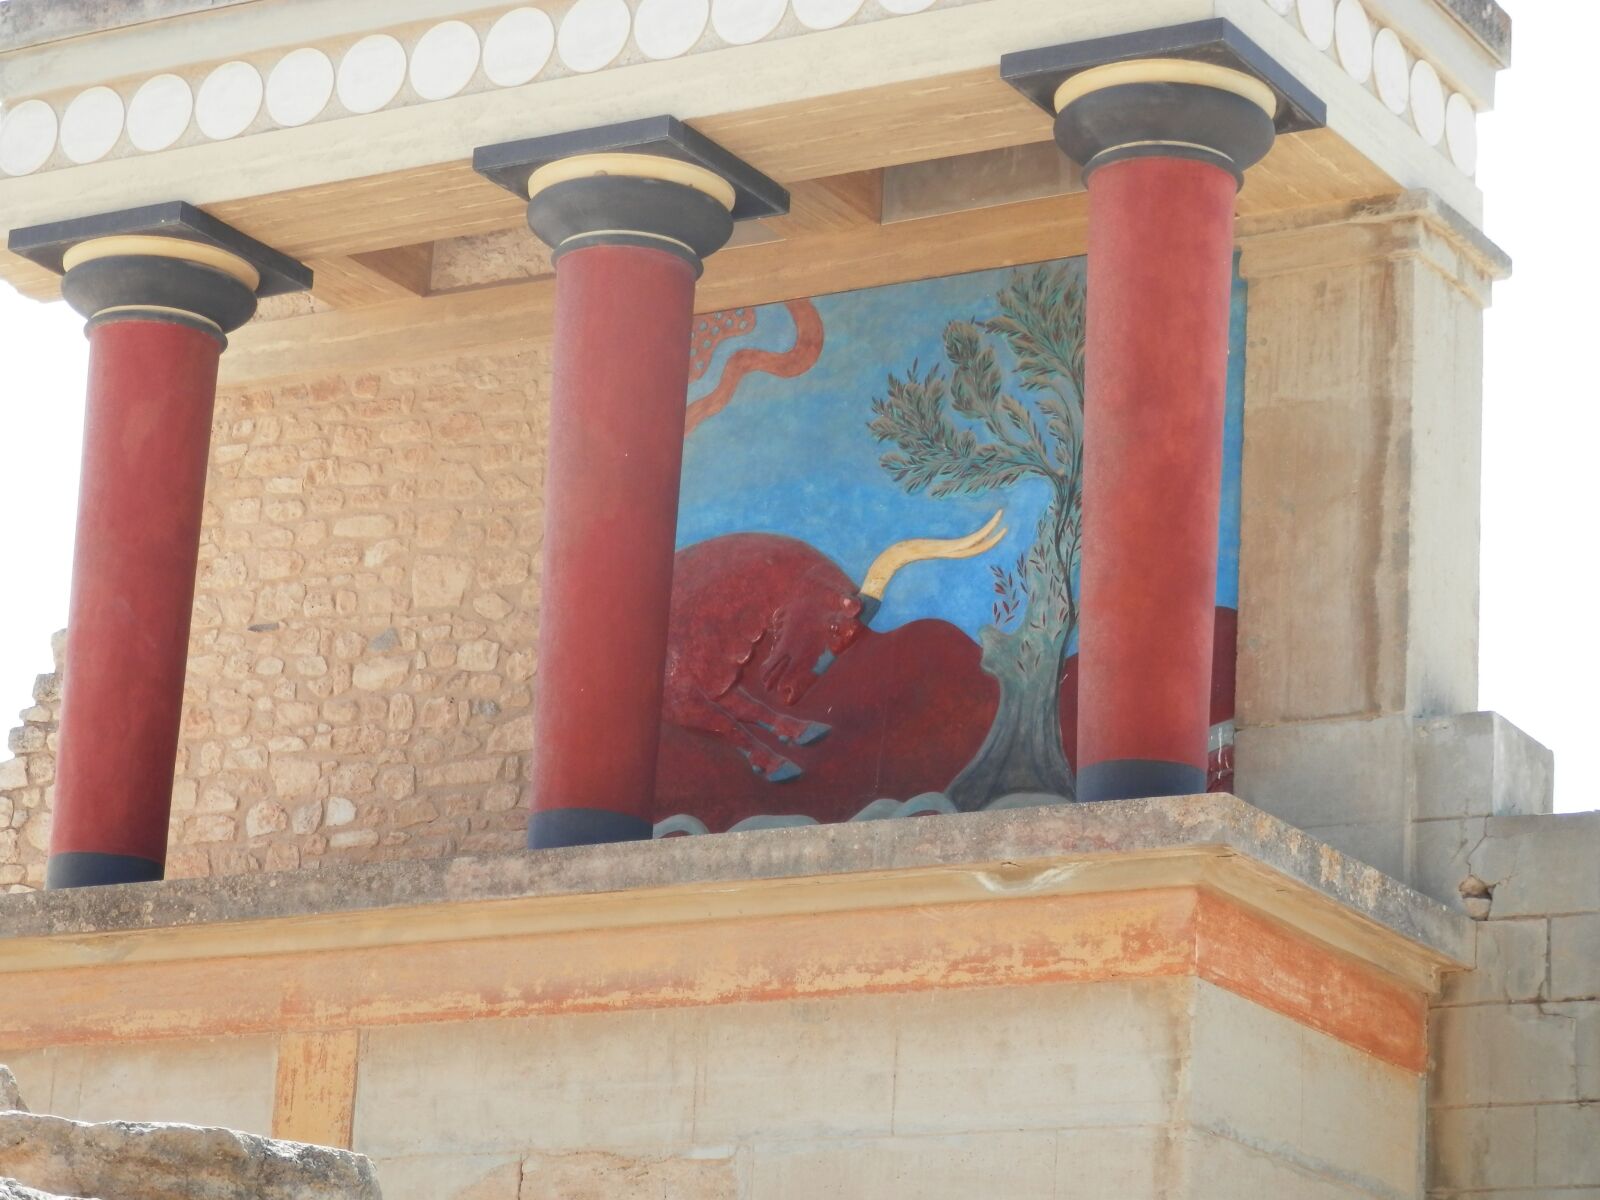 Olympus SZ-14 sample photo. Knossos, monuments, ancient times photography